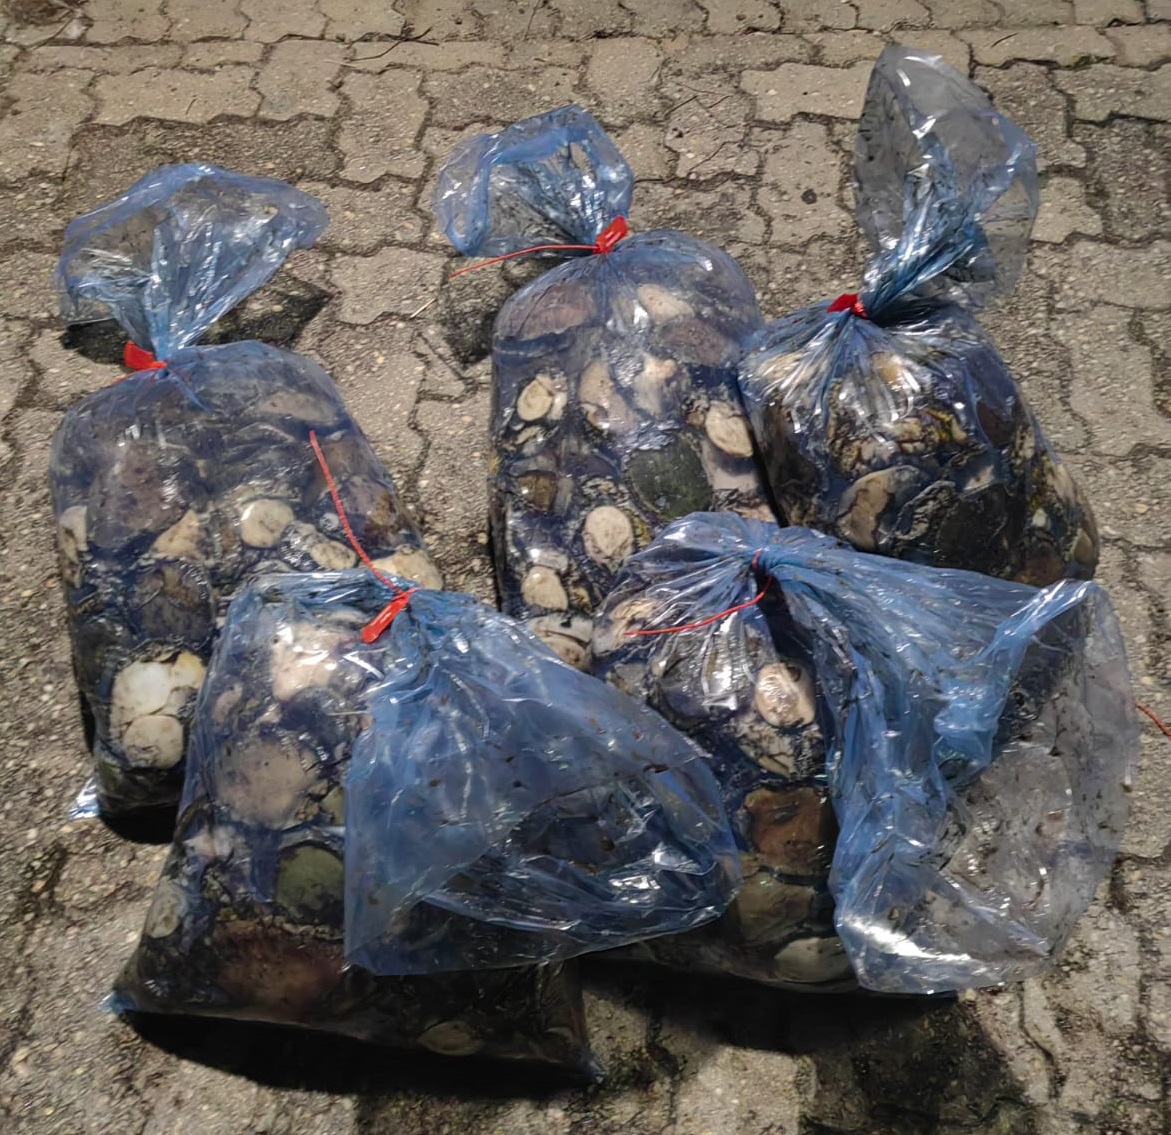 Knysna police confiscates large quantity of abalone on the N2 Highway